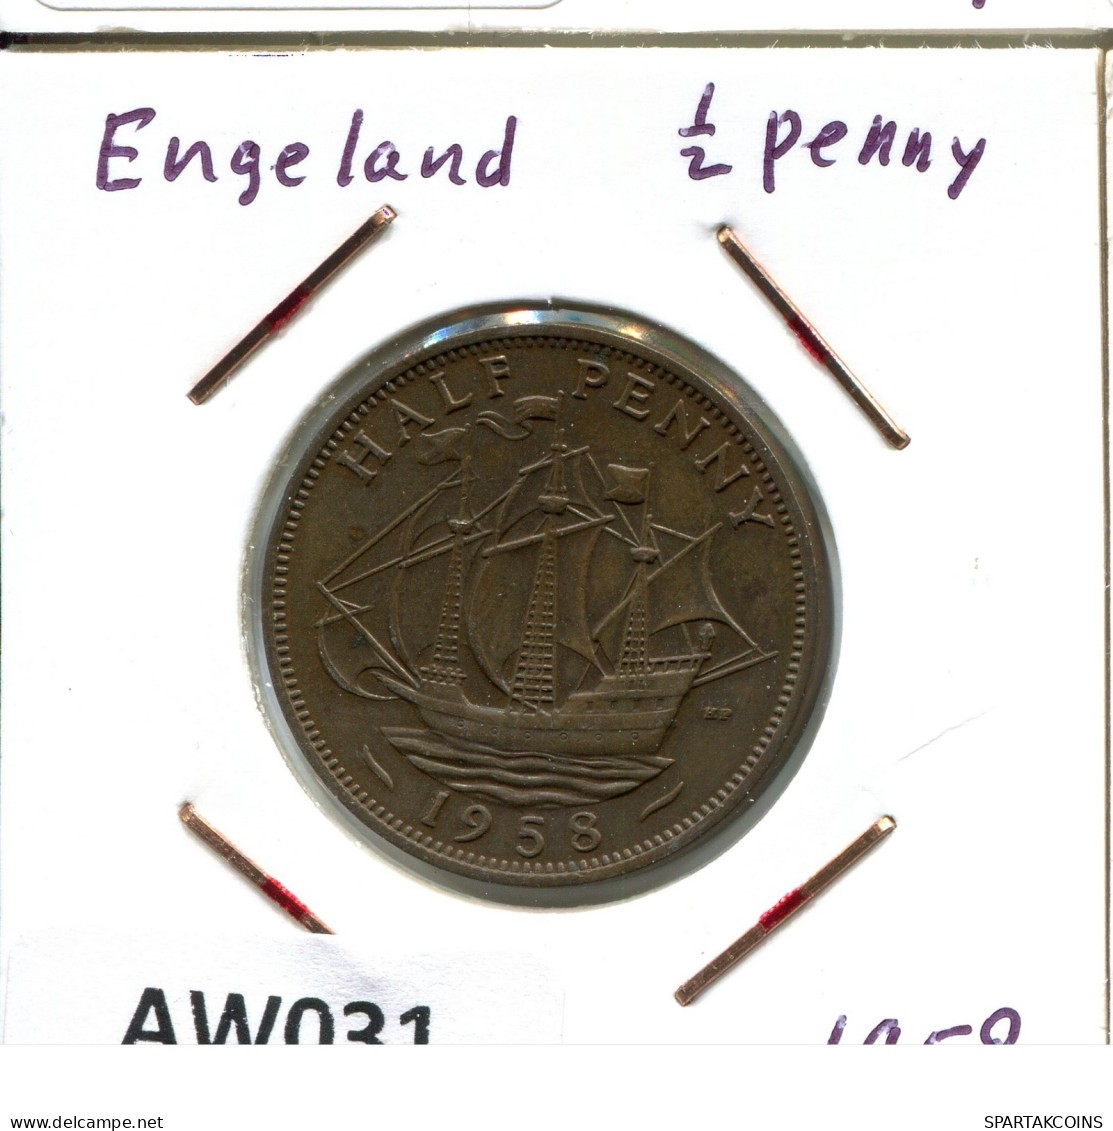 HALF PENNY 1958 UK GREAT BRITAIN Coin #AW031.U.A - C. 1/2 Penny